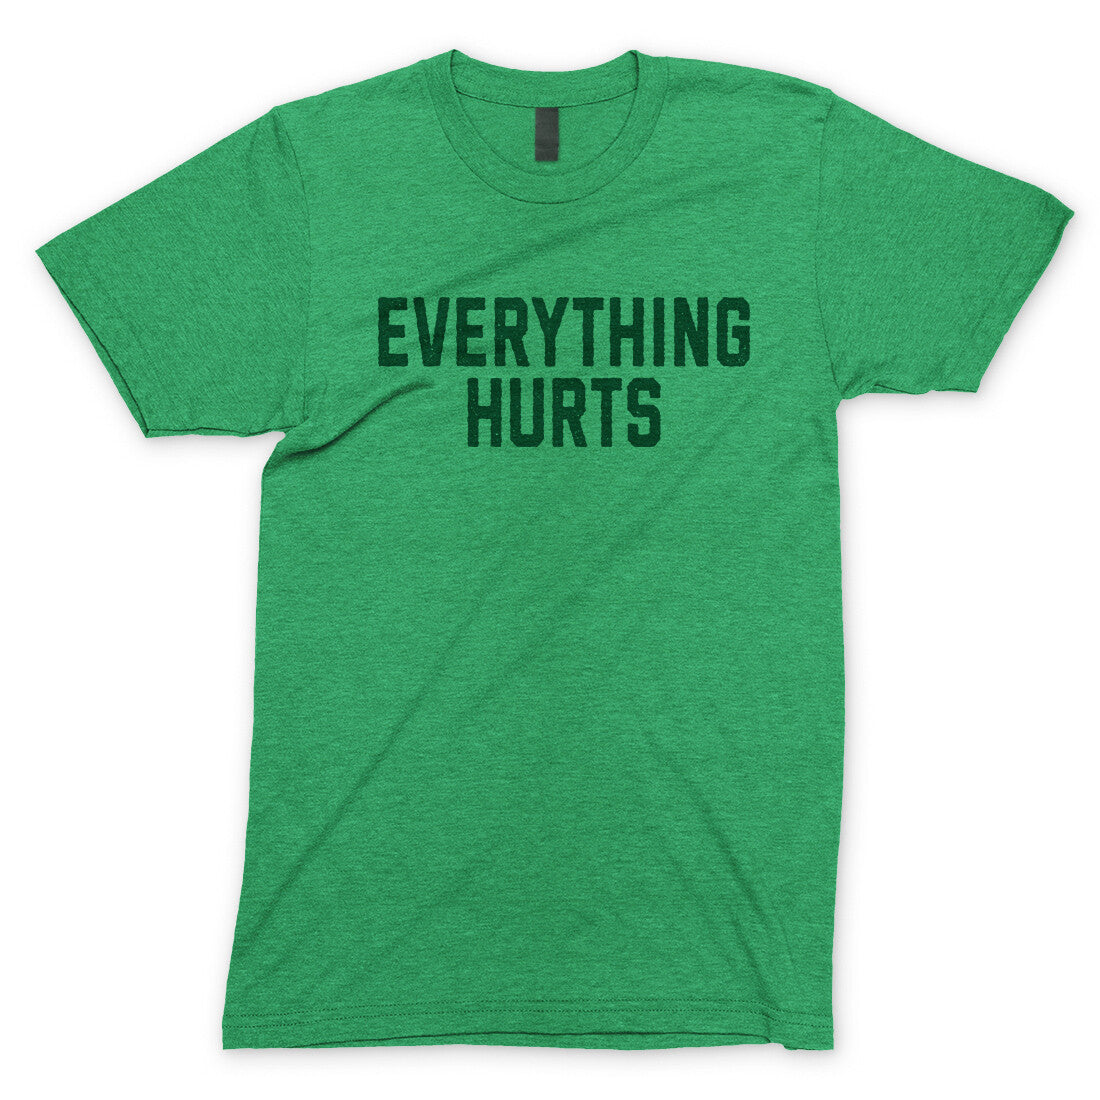 Everything Hurts in Heather Irish Green Color